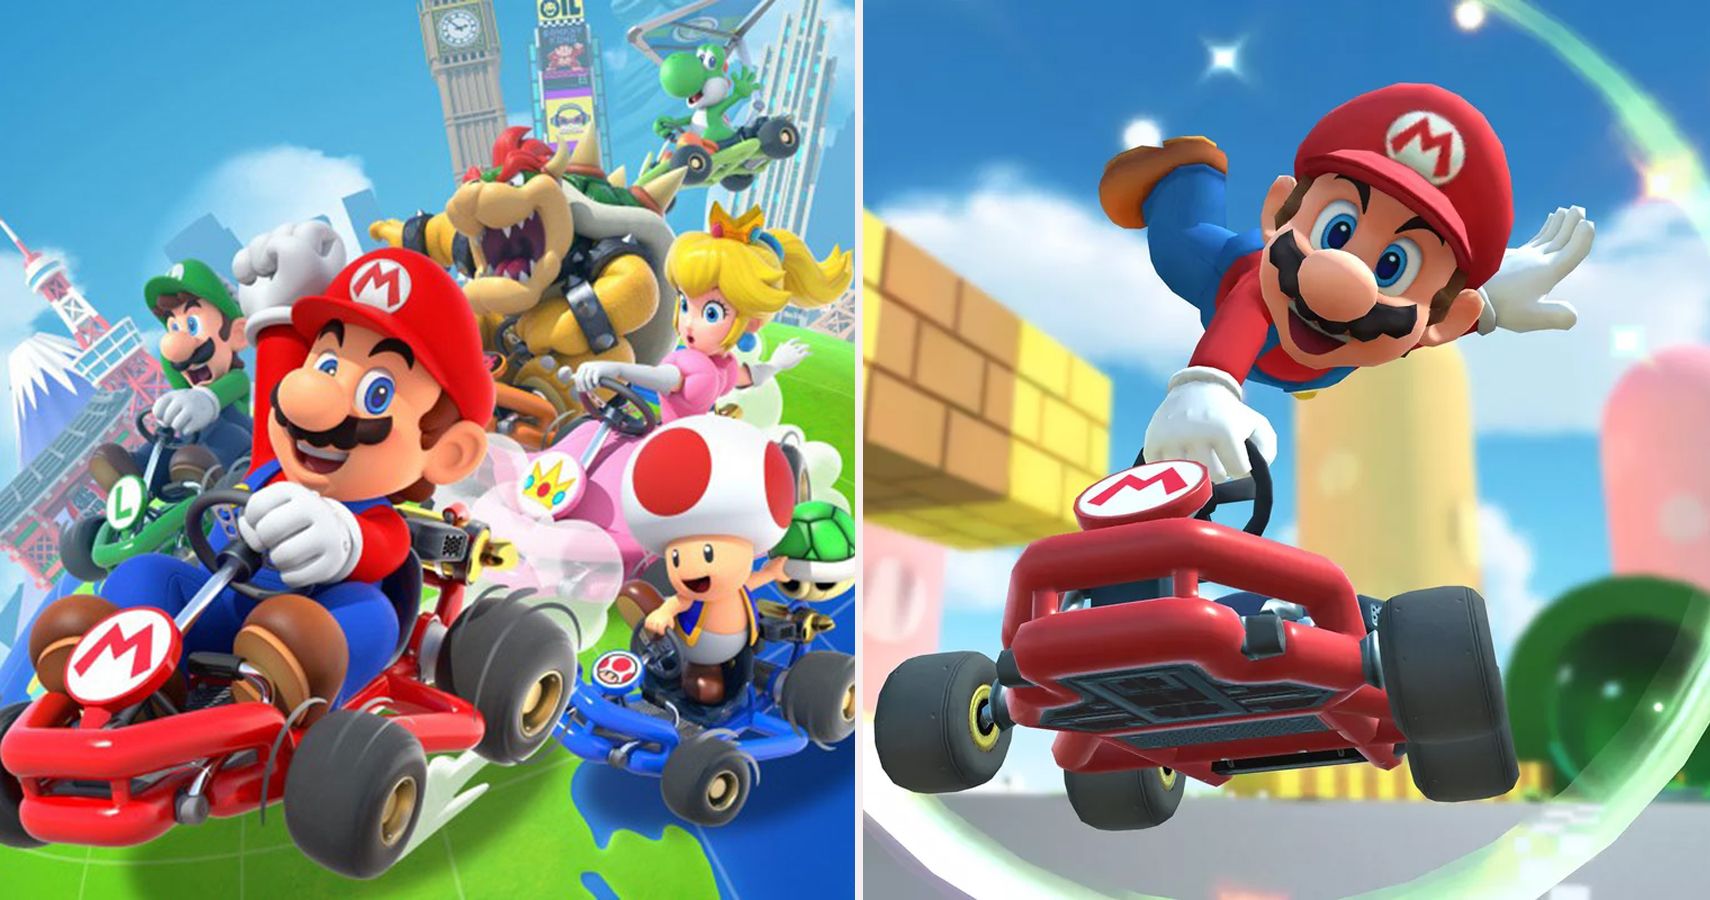 Mario Kart Tour on X: It's a bit early, but here's a sneak peek at the  next tour in #MarioKartTour! You can get the sense that some brilliant  races are about to